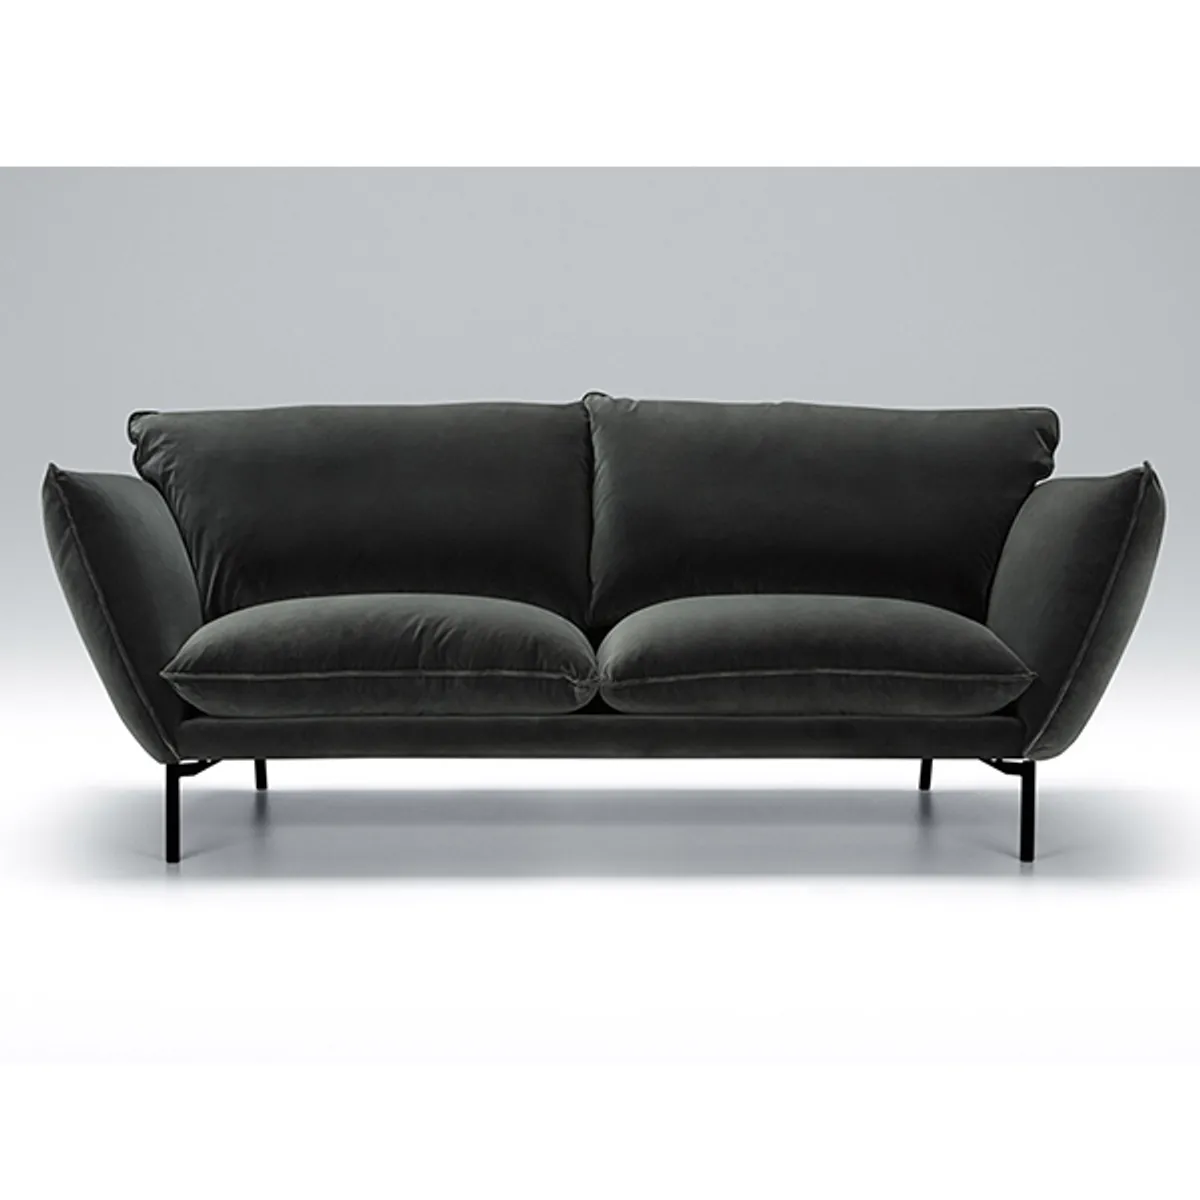 Beagle Sofa Grey Velvet Inside Out Contracts